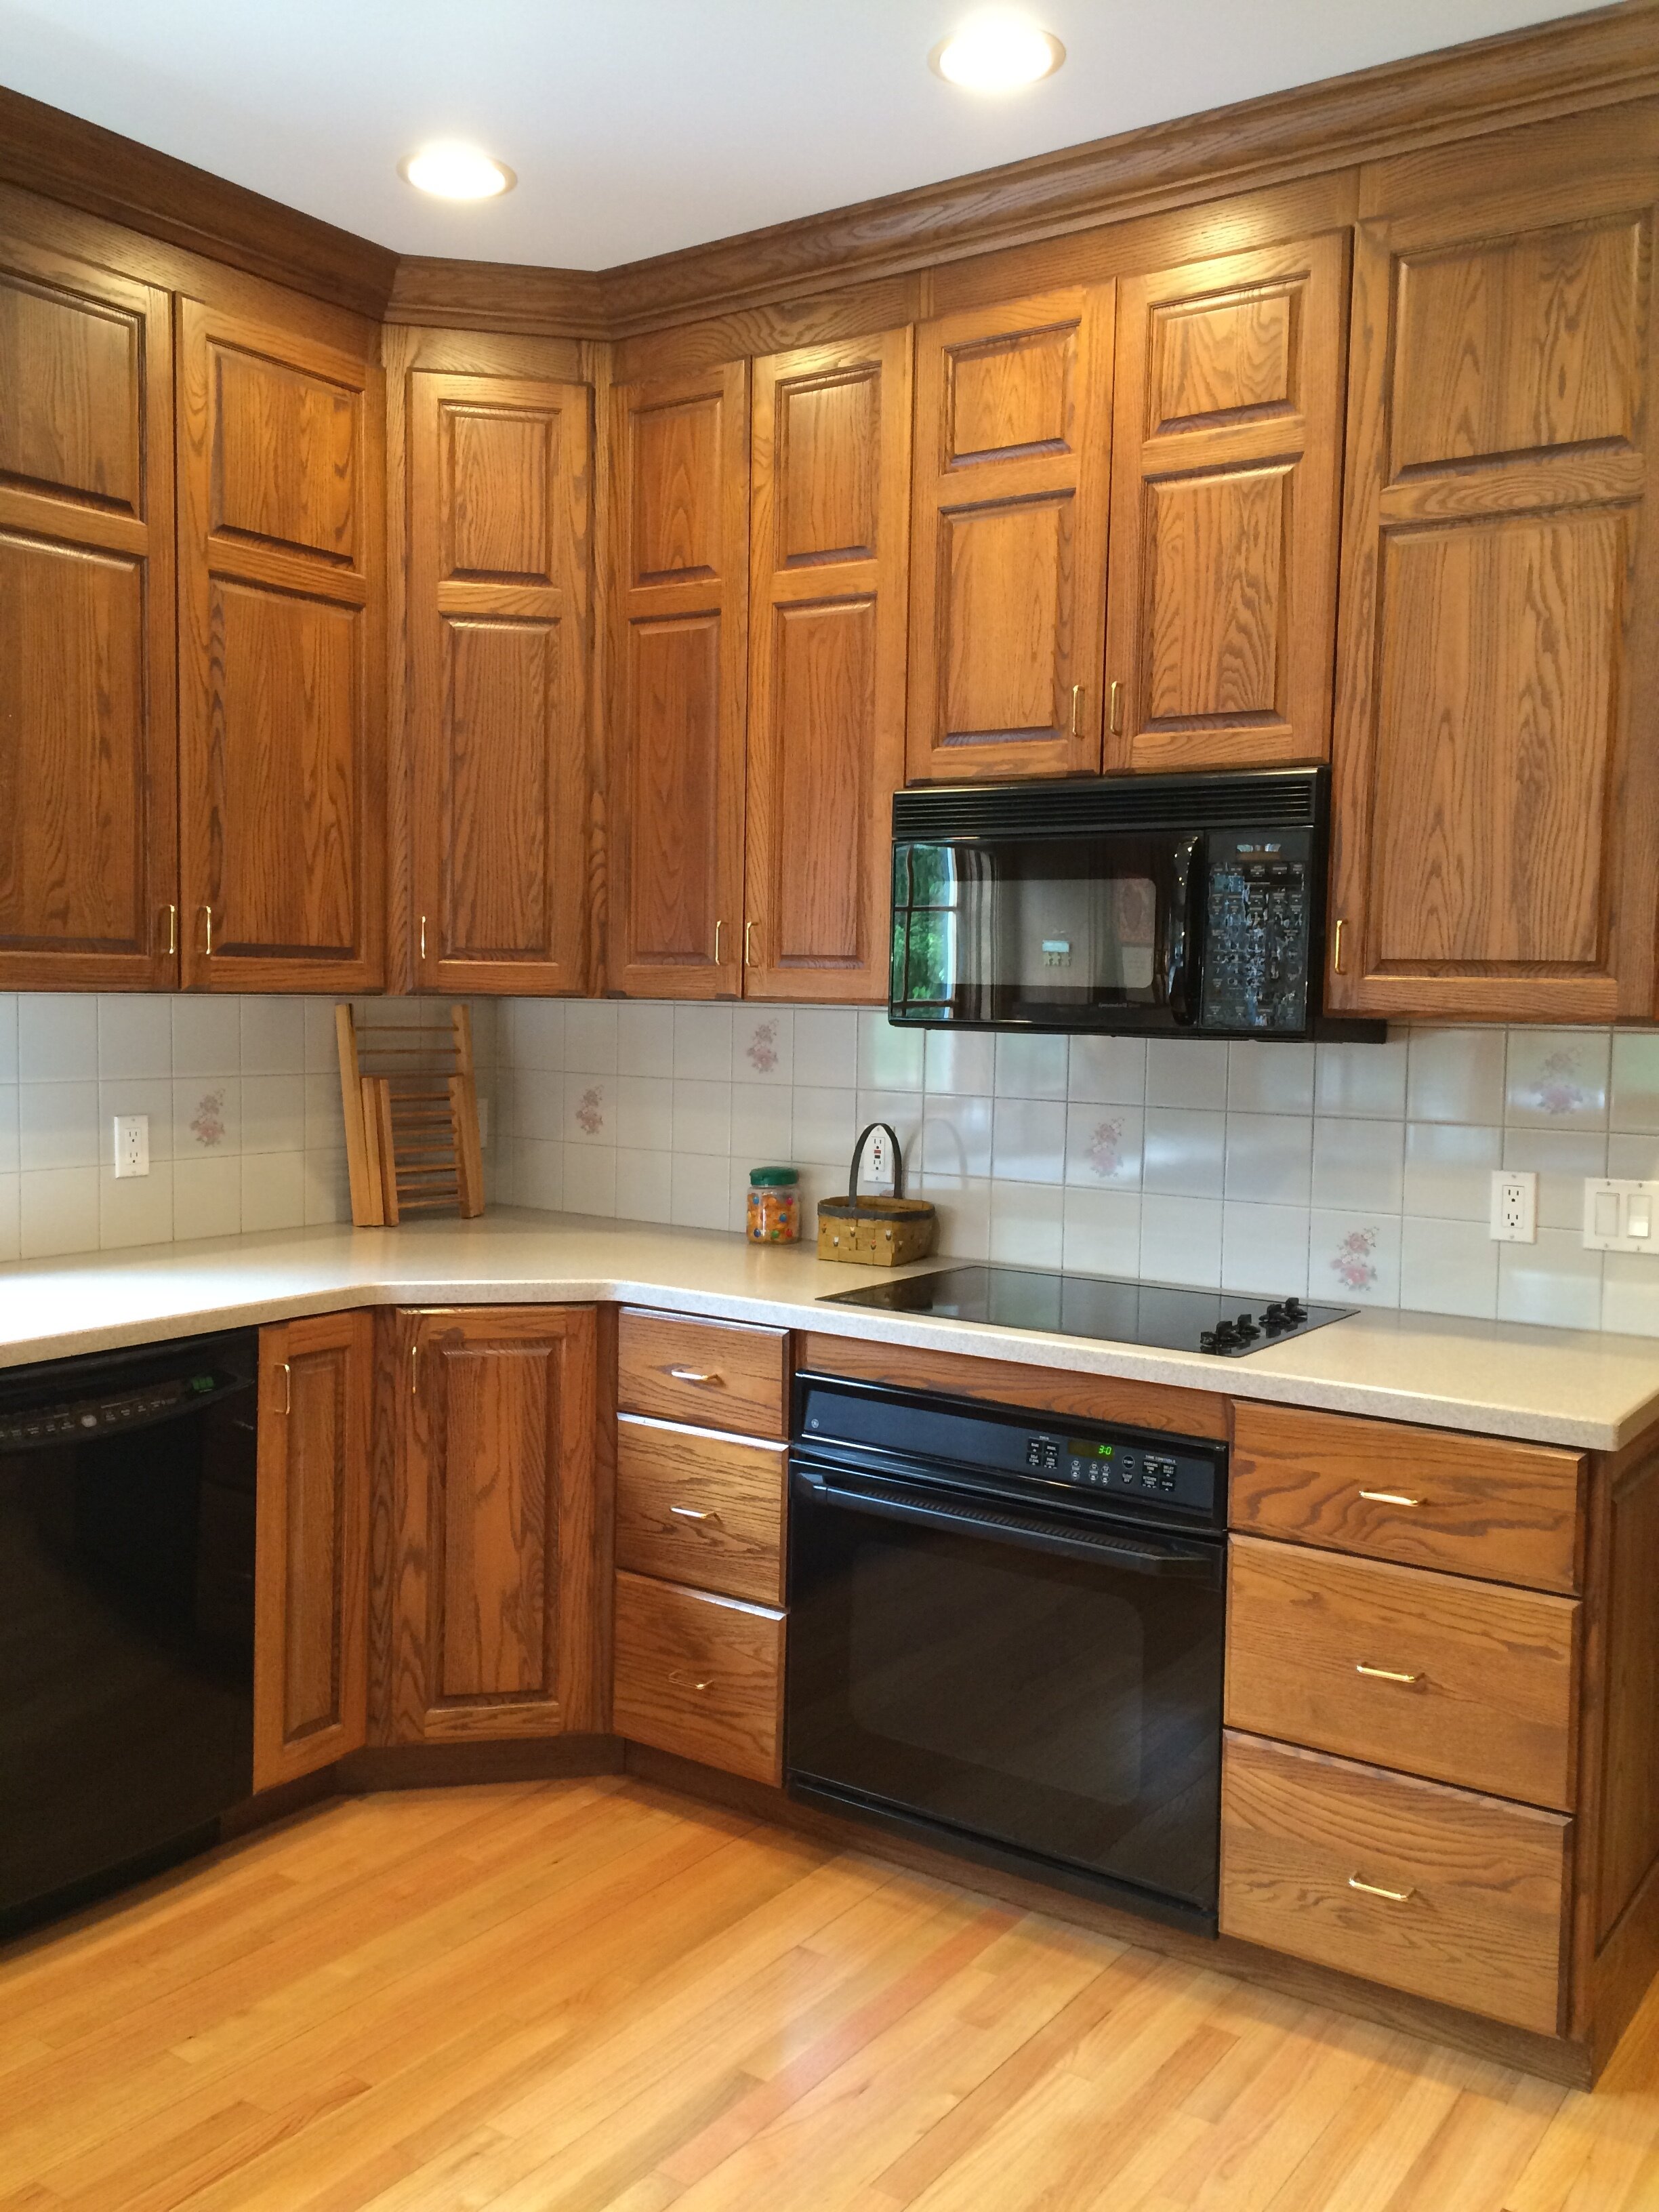 How To Make An Oak Kitchen Cool Again, What Color Tile Looks Good With Oak Cabinets